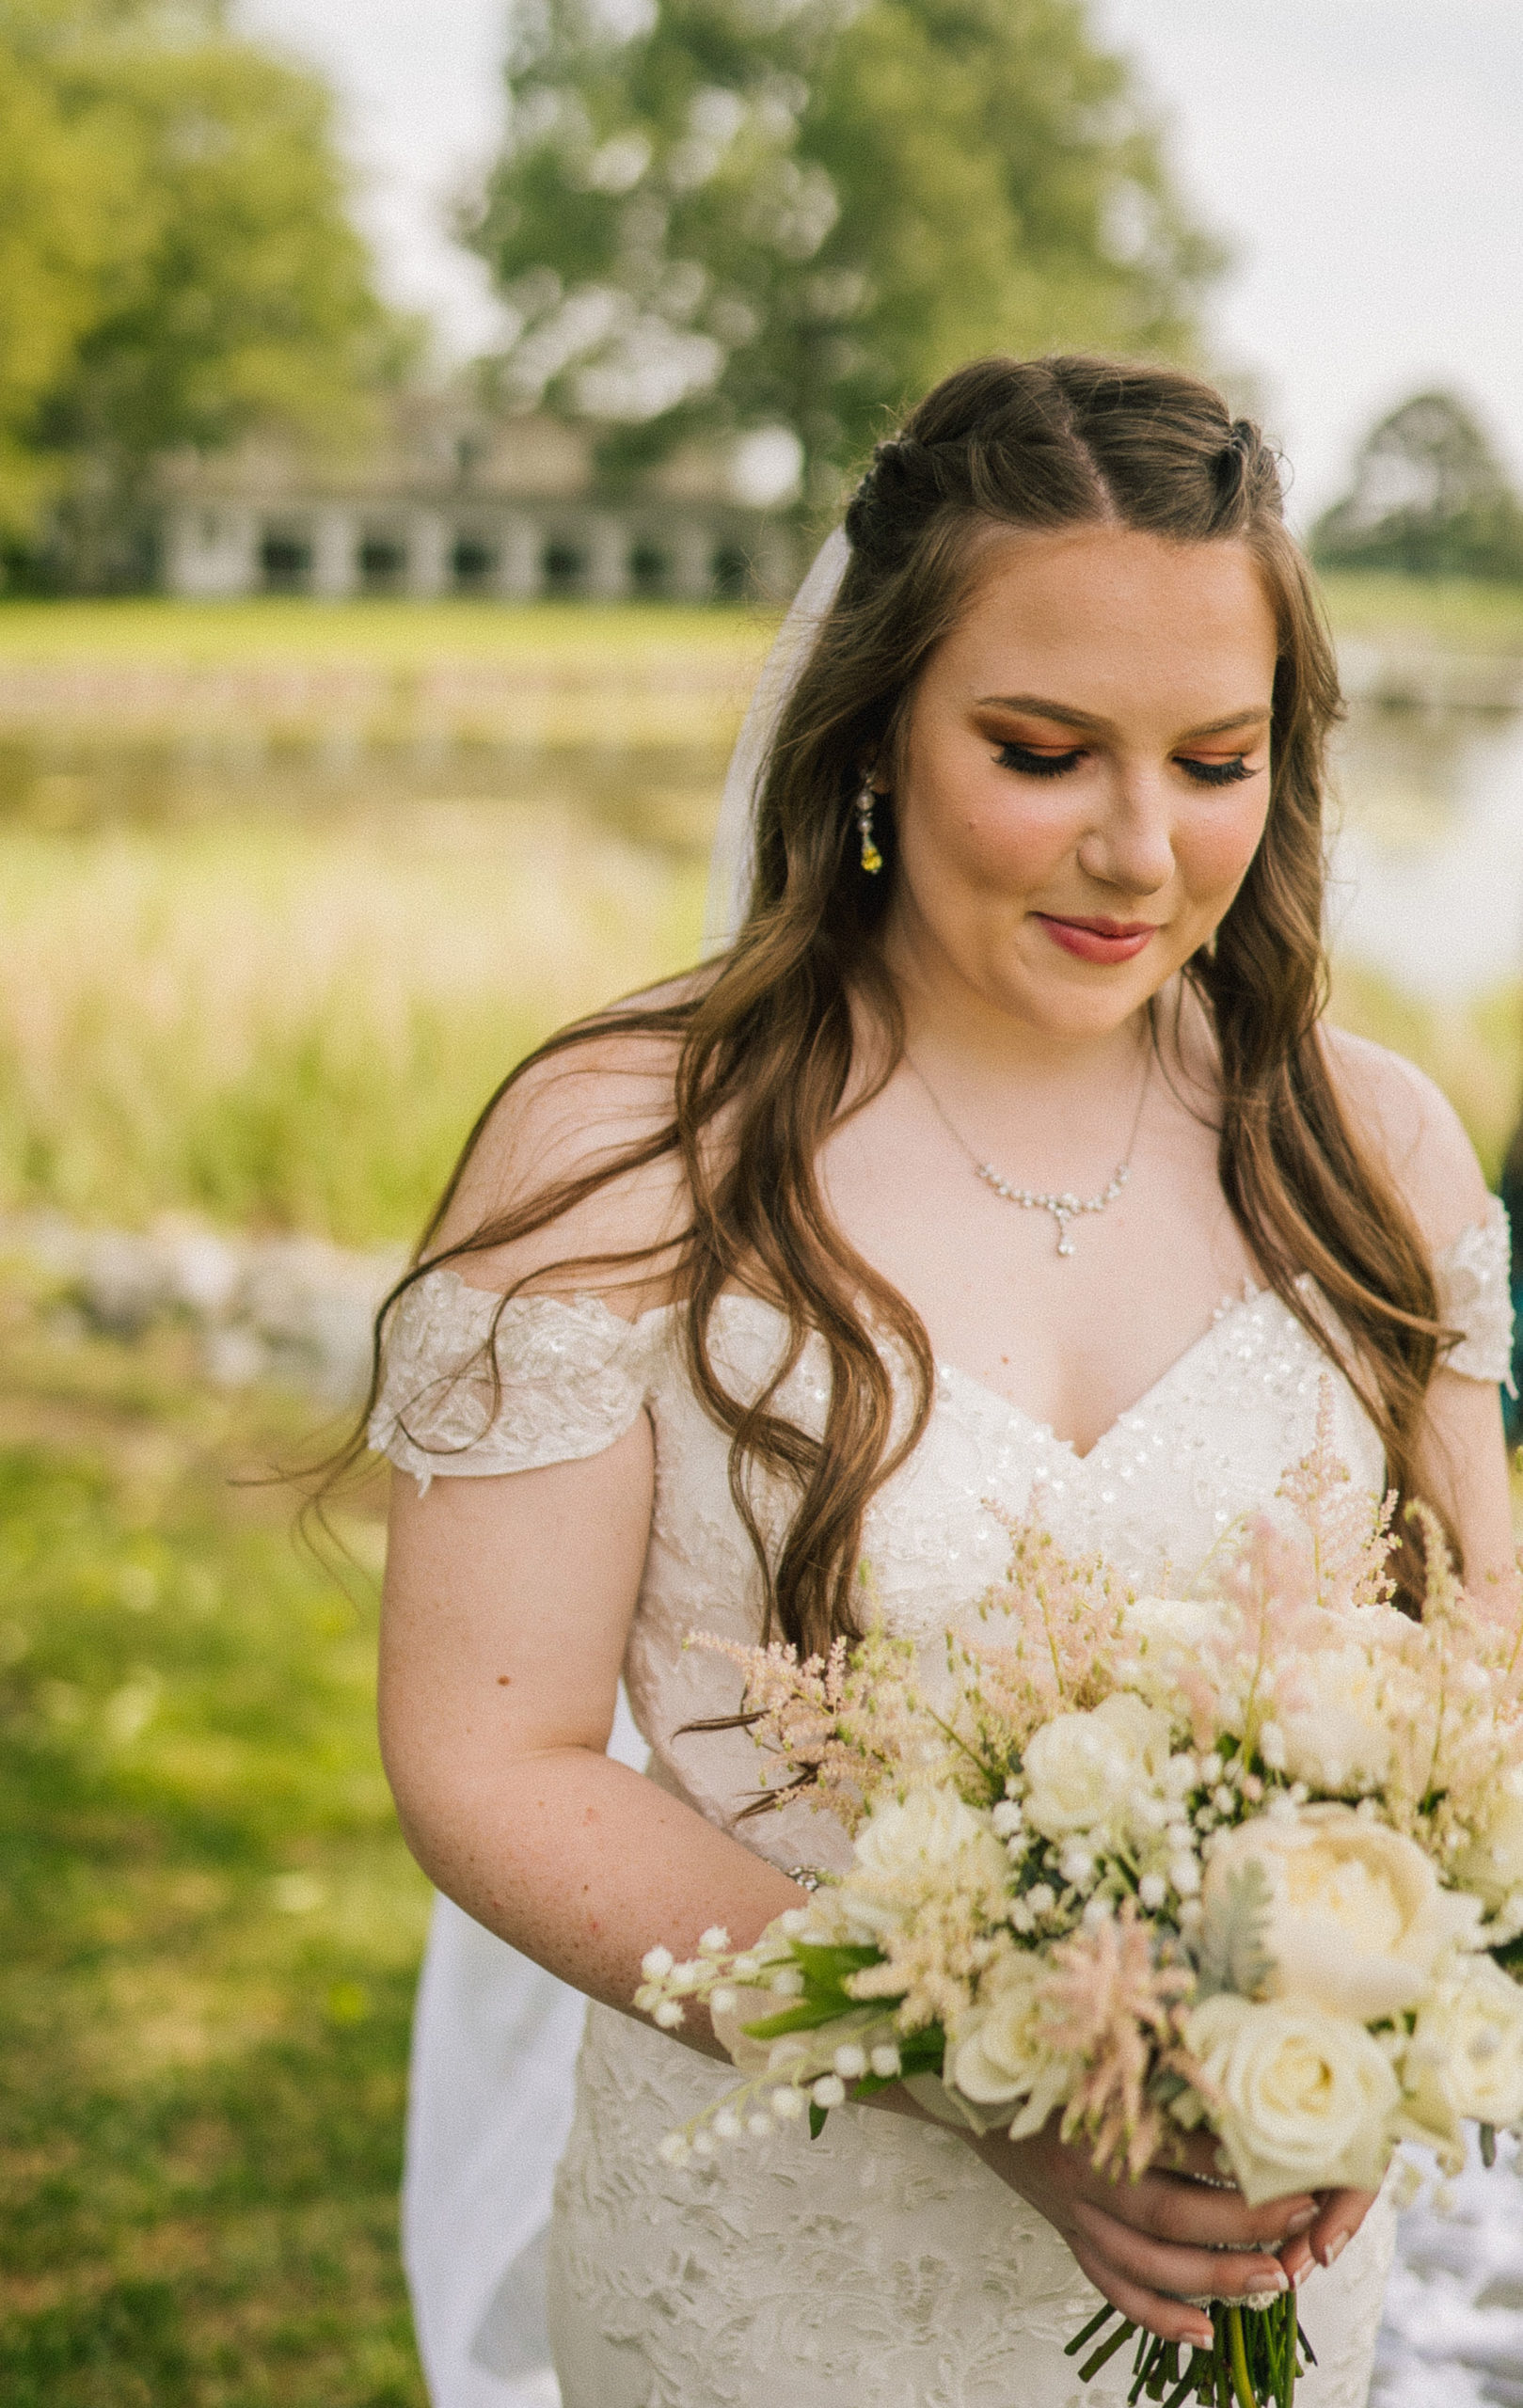 beautiful bride looking down at her white wedding bouquet as she smiles and stands next to the river at her wedding venue